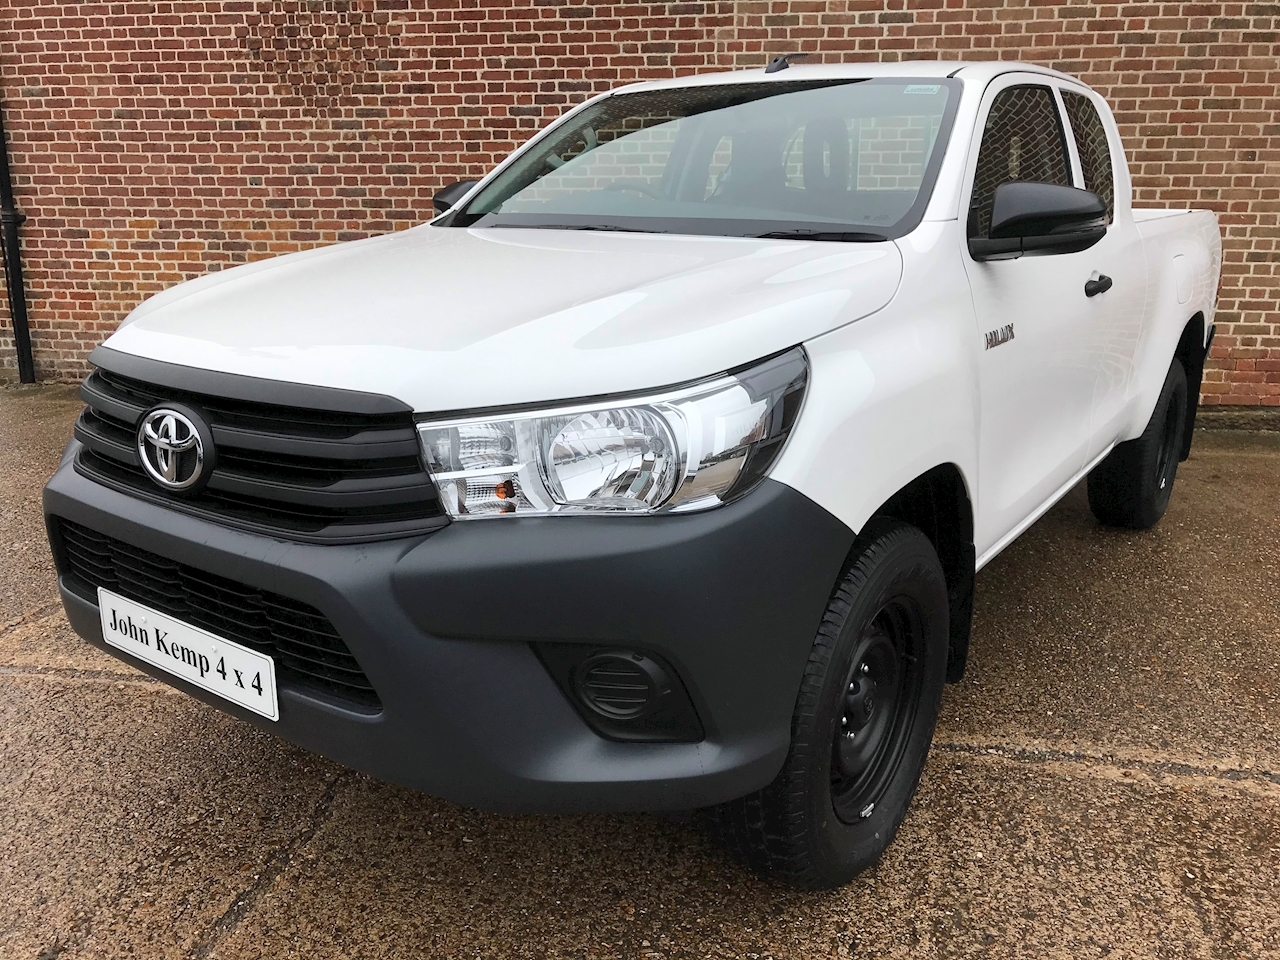 Hilux Active 2.4 4dr Extra Cab Pickup Manual Diesel